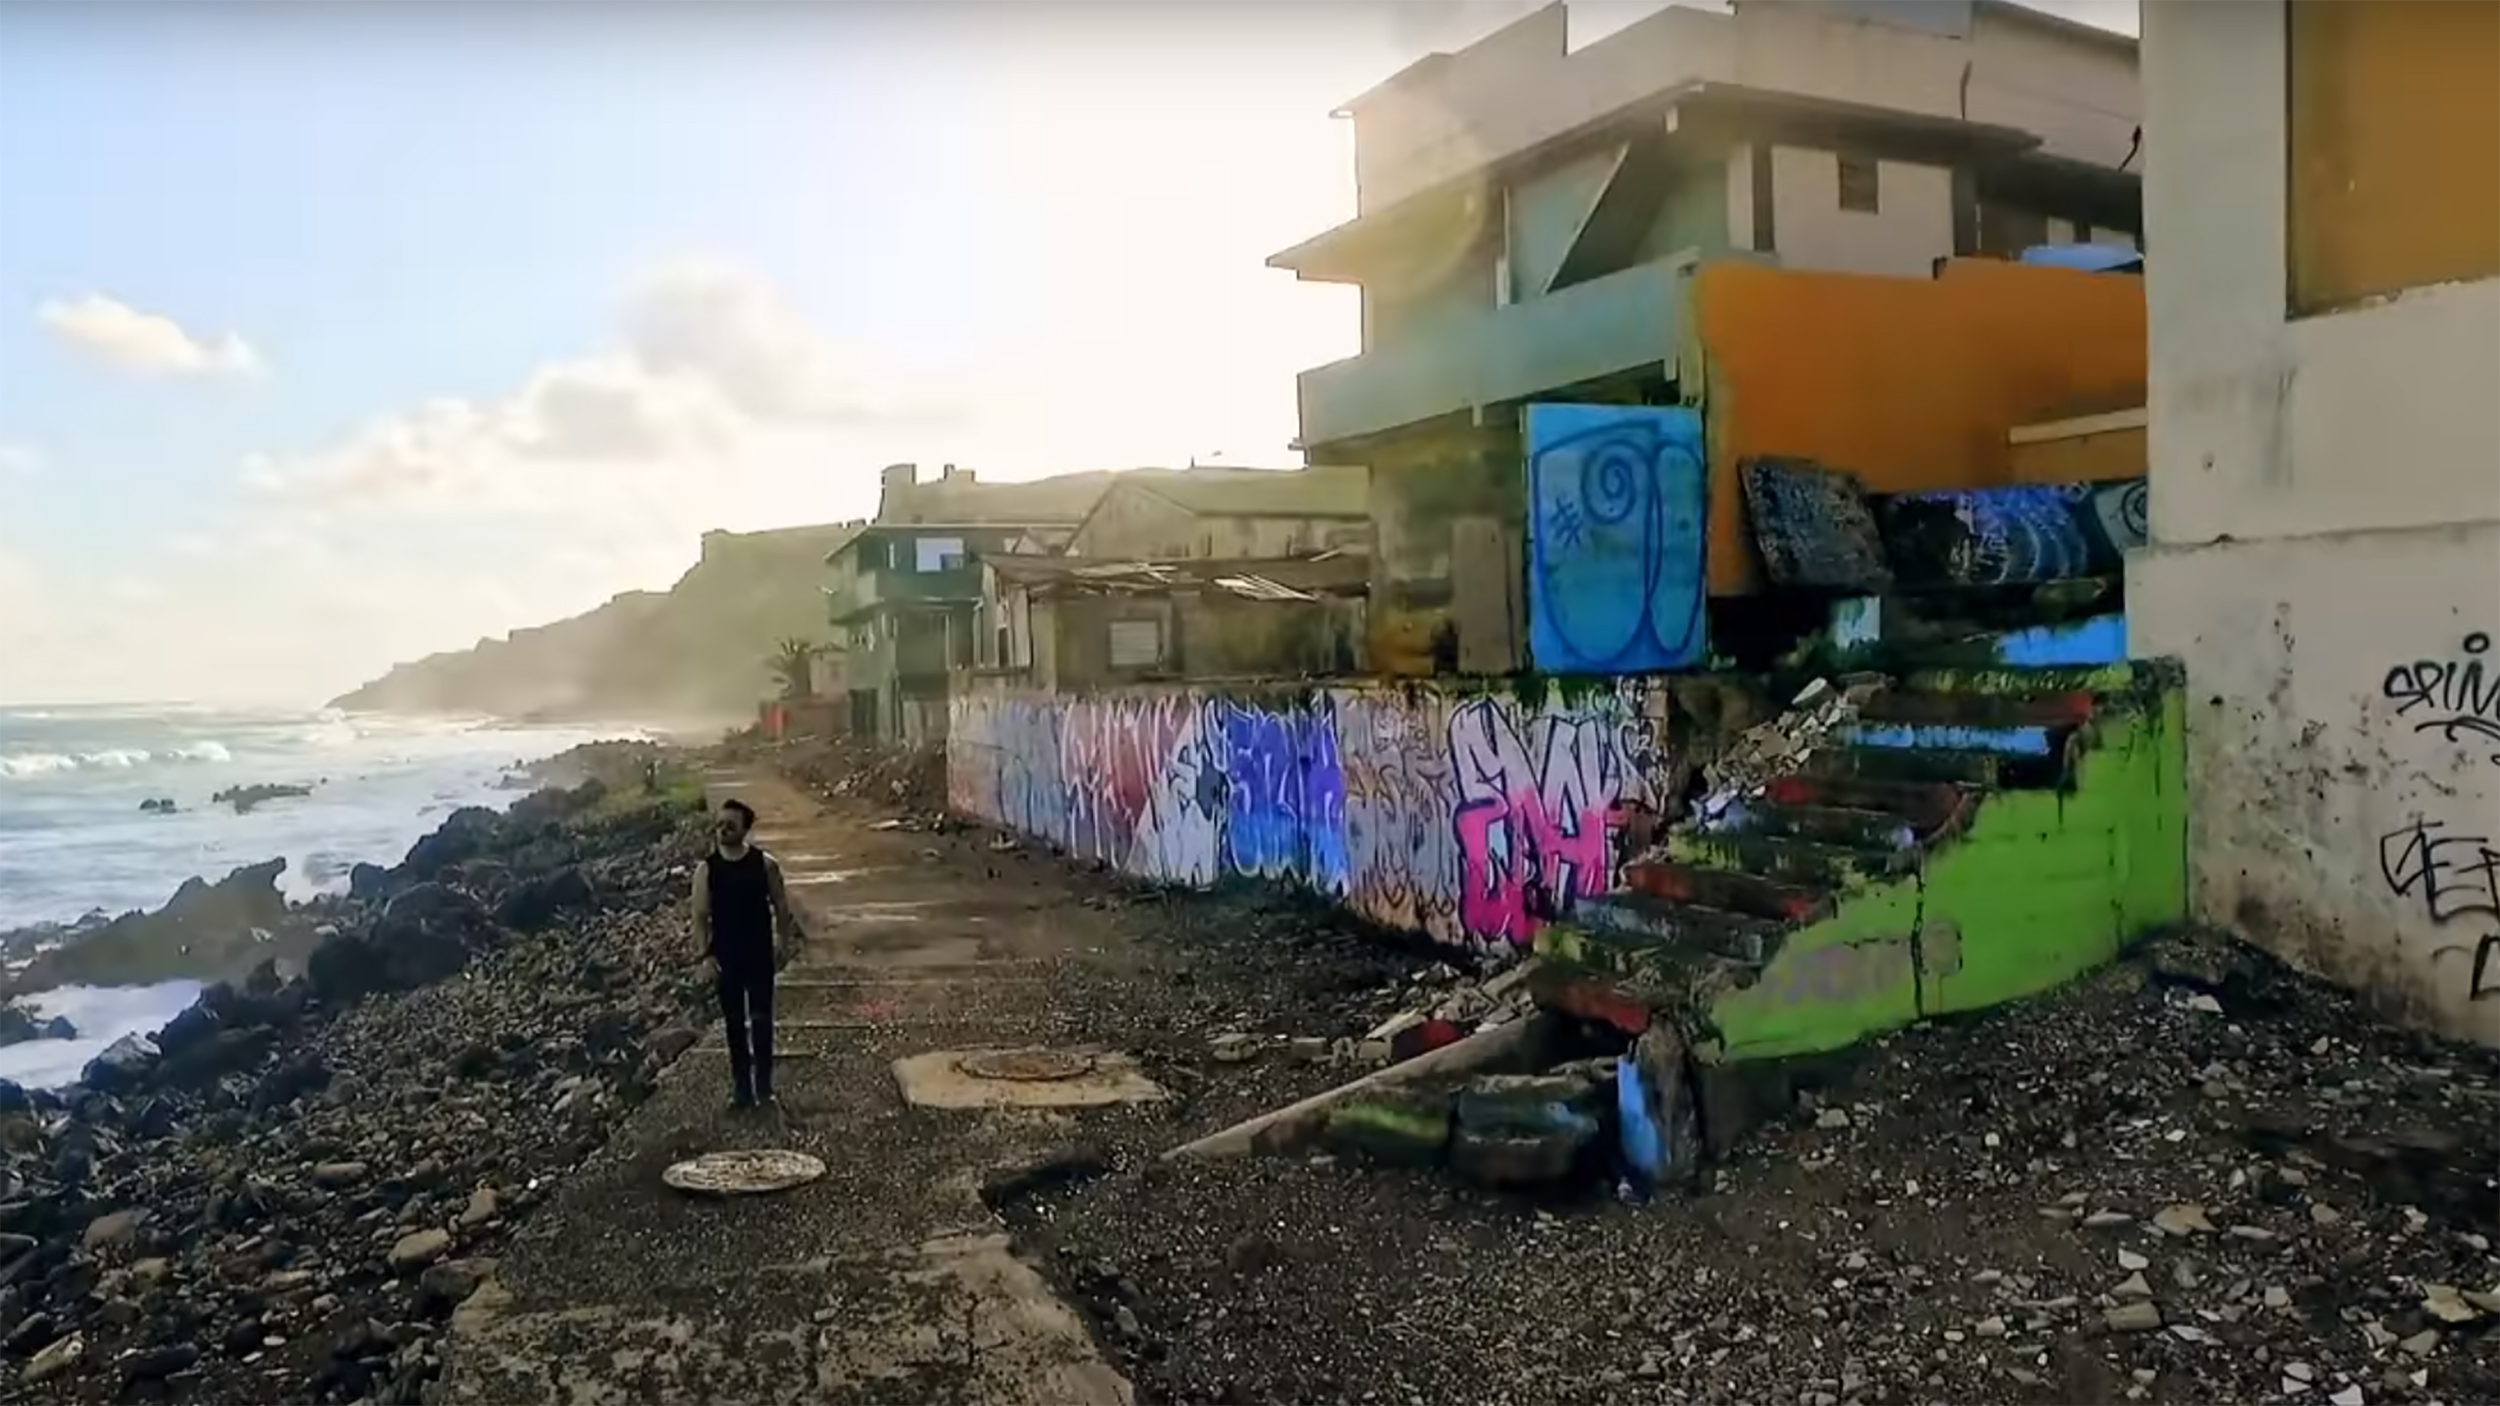 Despacito Made This Neighborhood Famous Hurricane Maria Left It In Ruins Cnn